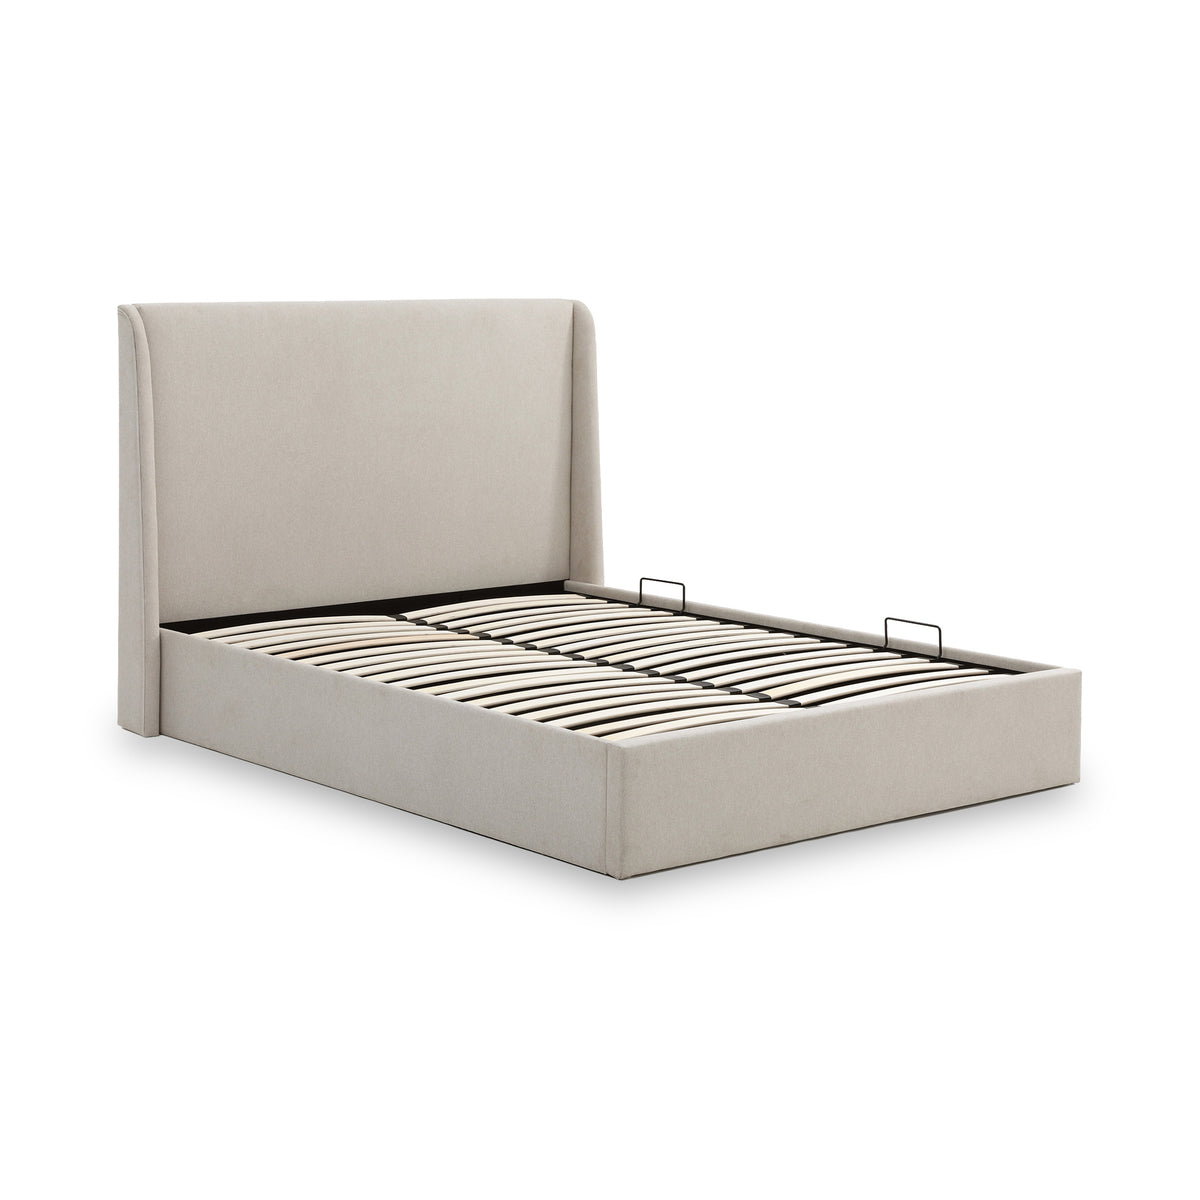 Deacon Stone Multilift Ottoman Bed from Roseland Furniture